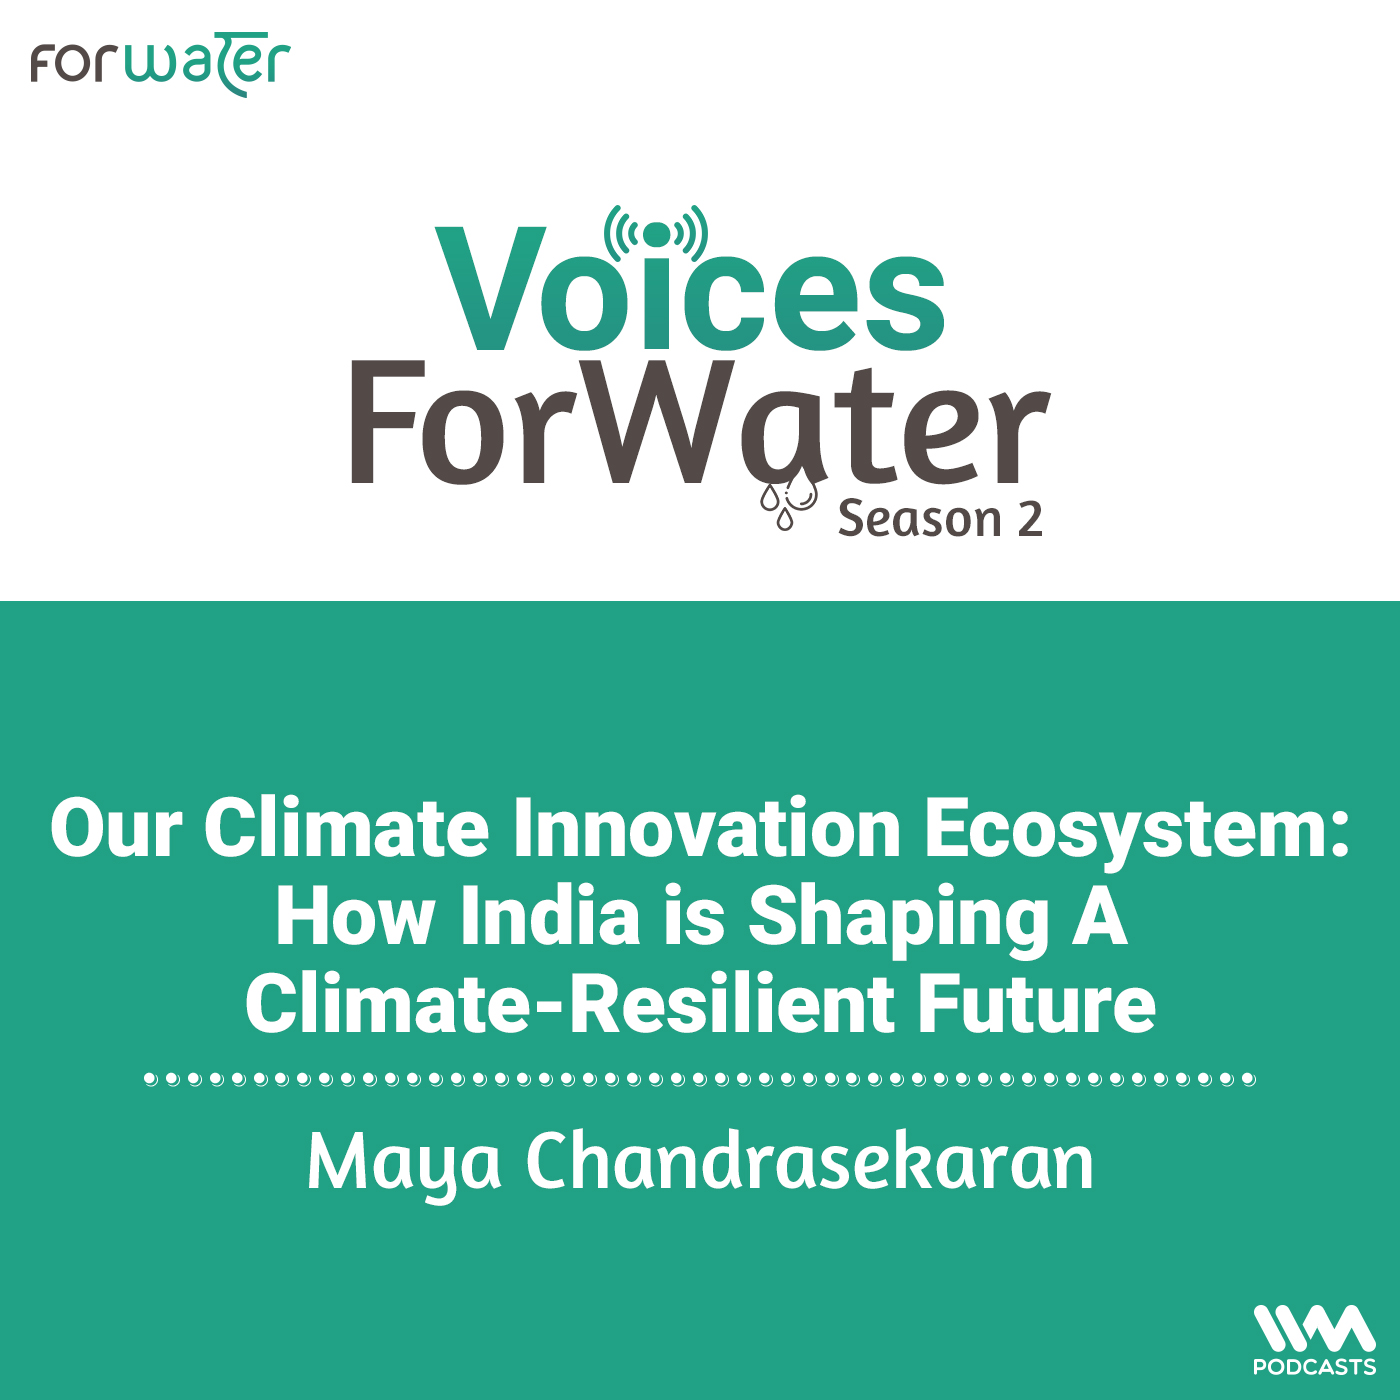 Our Climate Innovation Ecosystem: How India is shaping a Climate-Resilient Future Ft. Maya Chandrasekaran